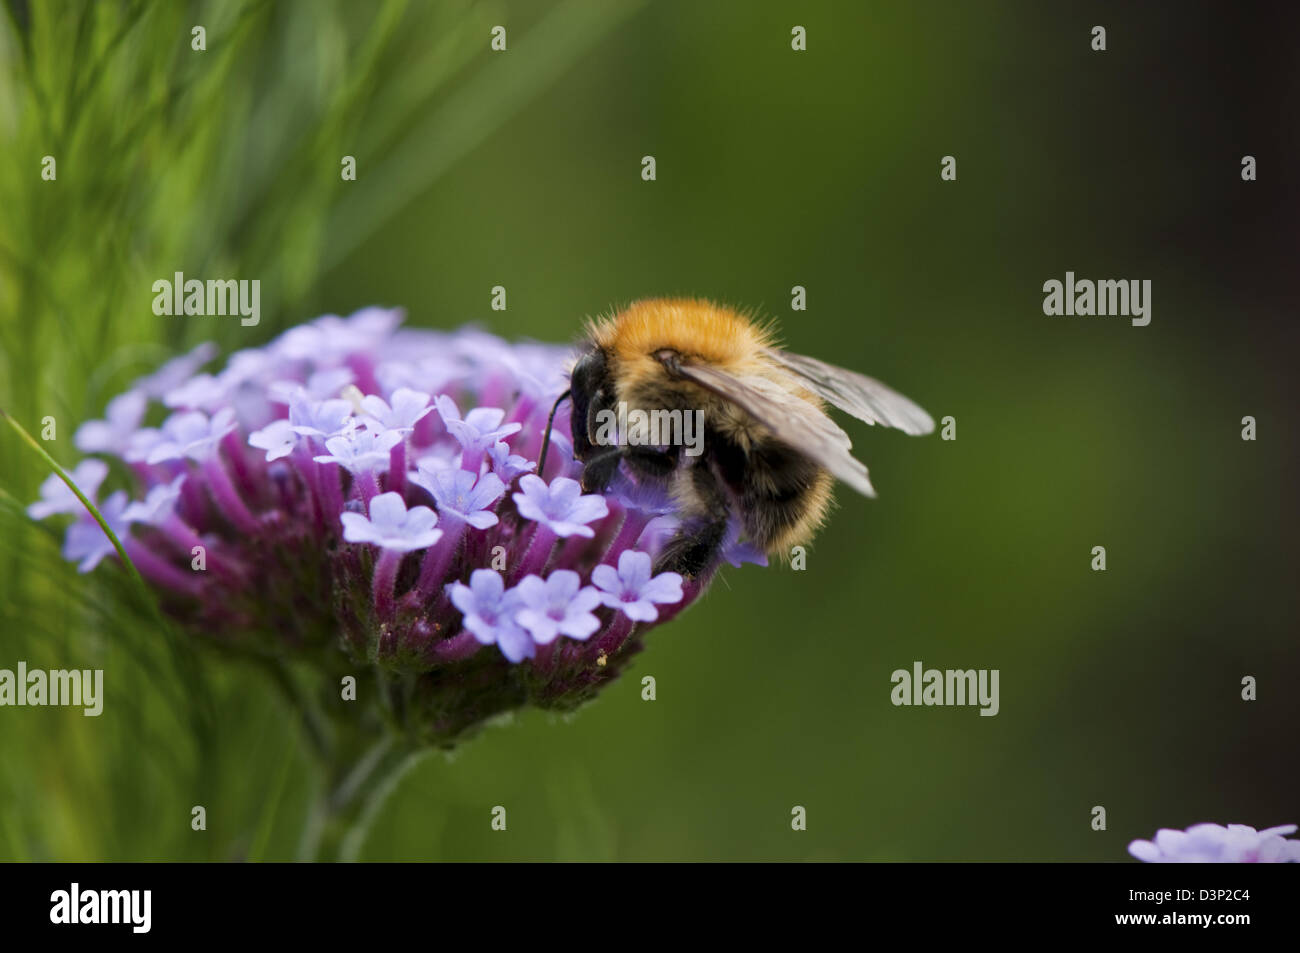 A single purple coloured flower being visited by a Bee. Stock Photo